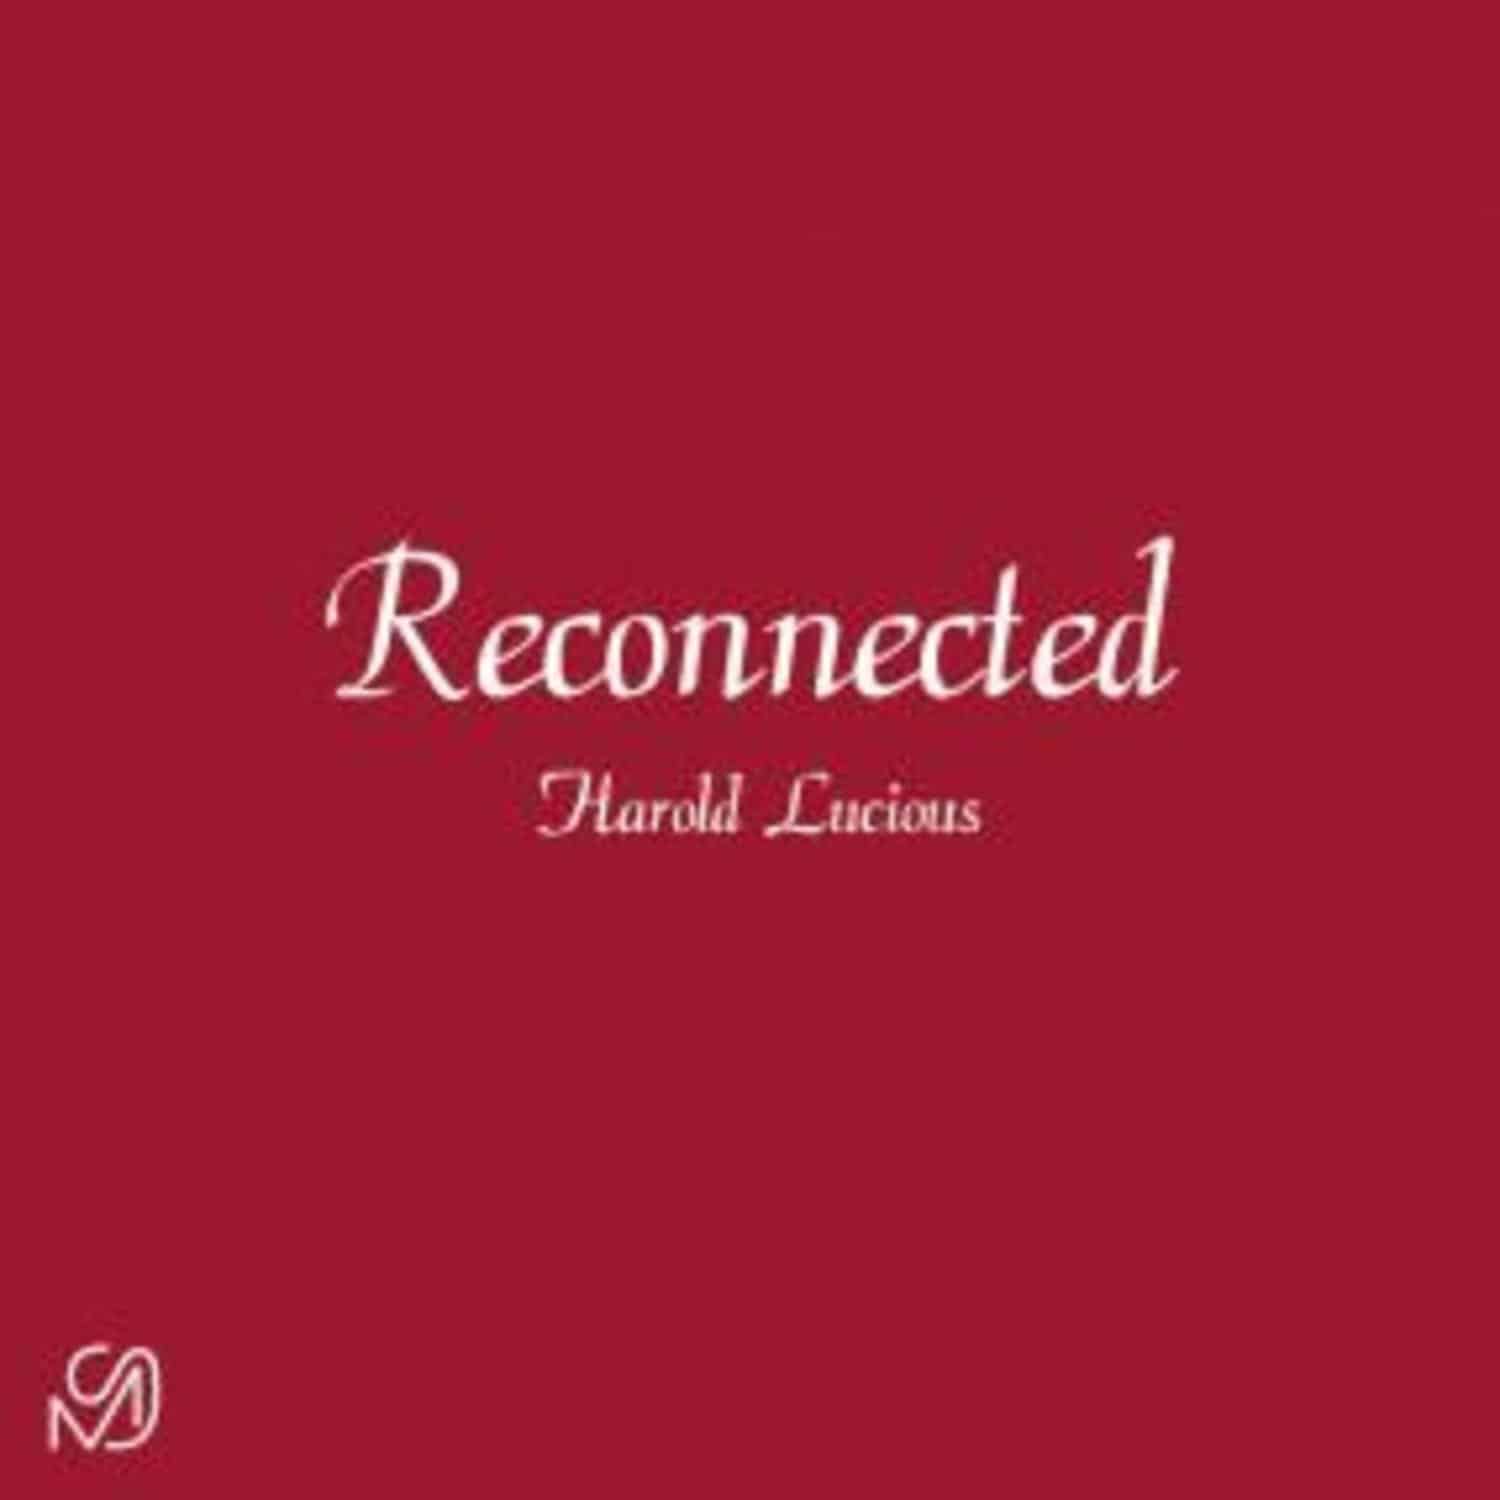 Harold Lucious - RECONNECTED